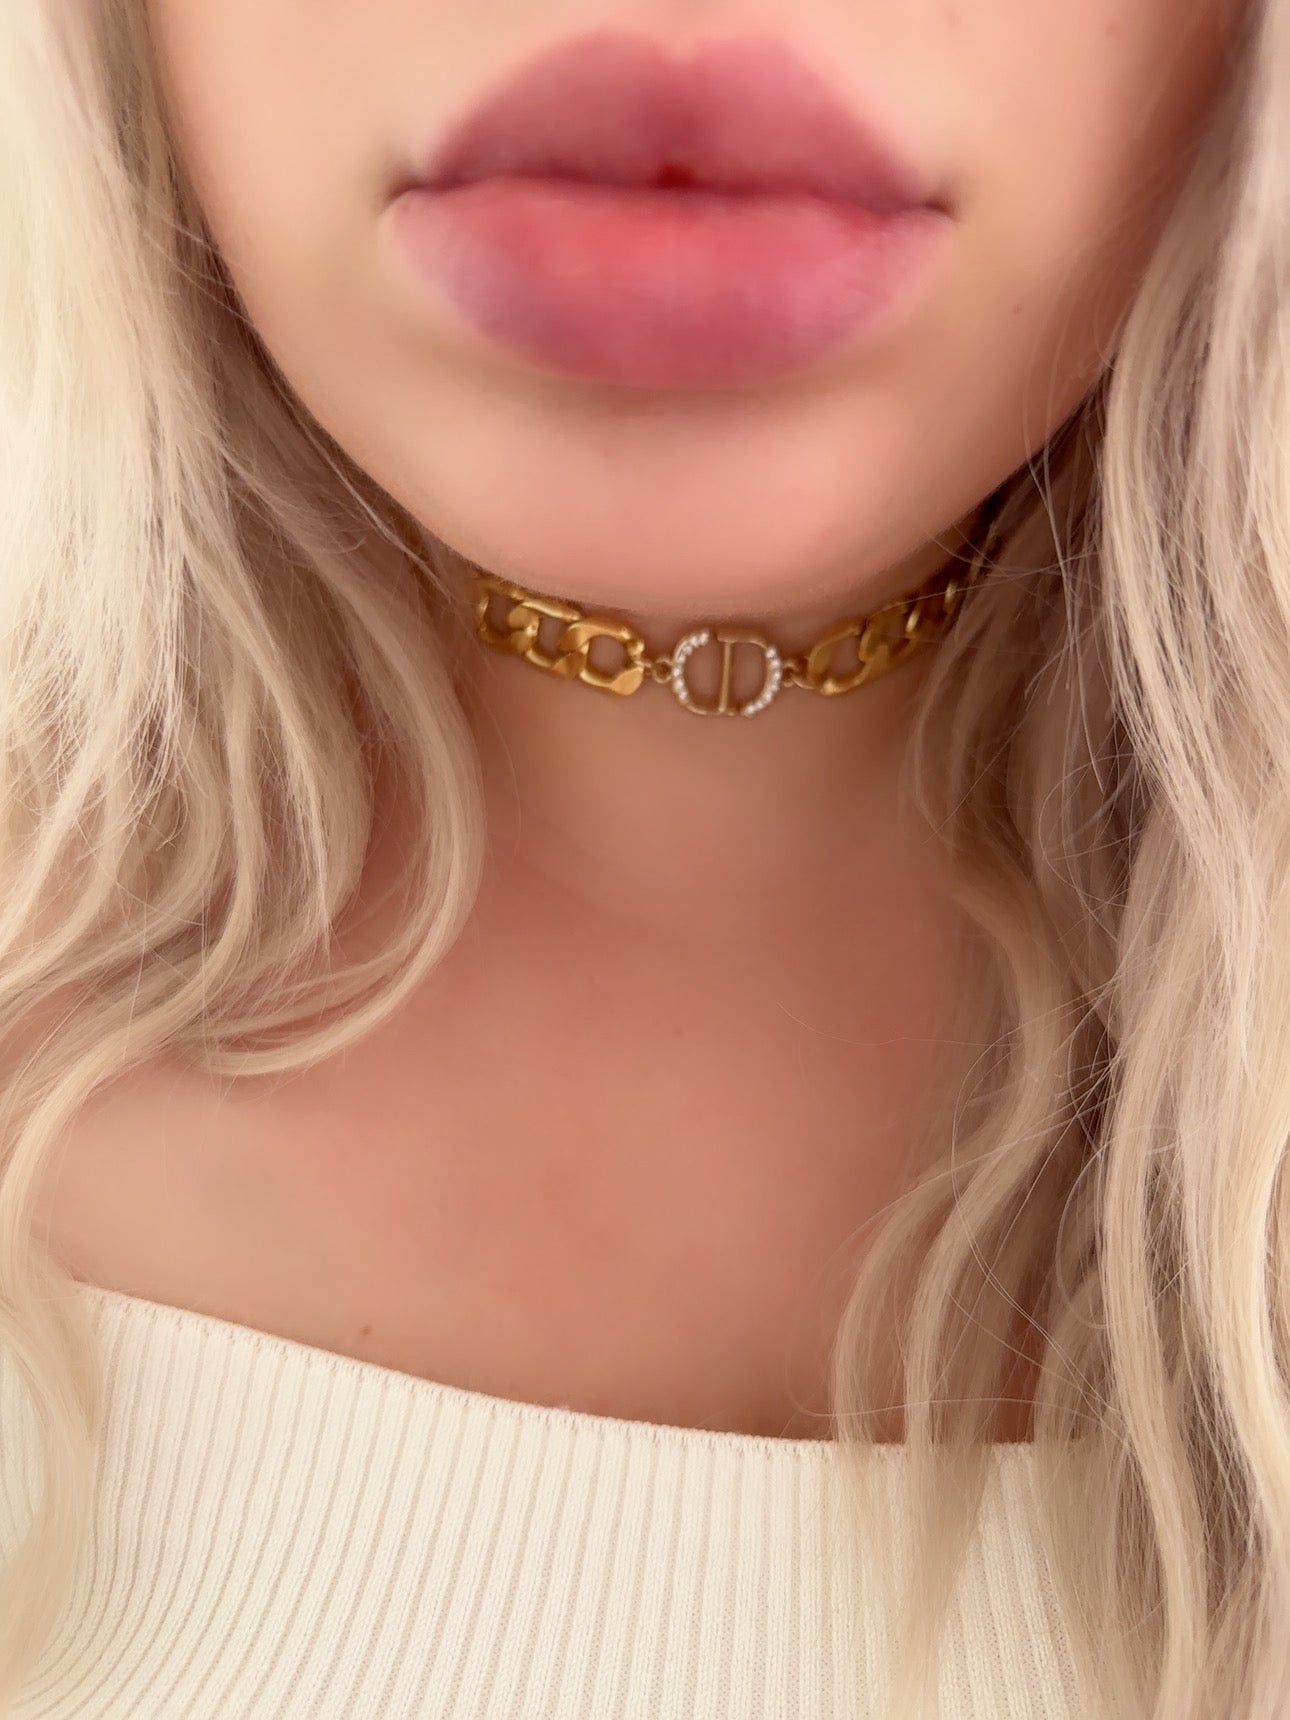 The “Christian Choker” Necklace